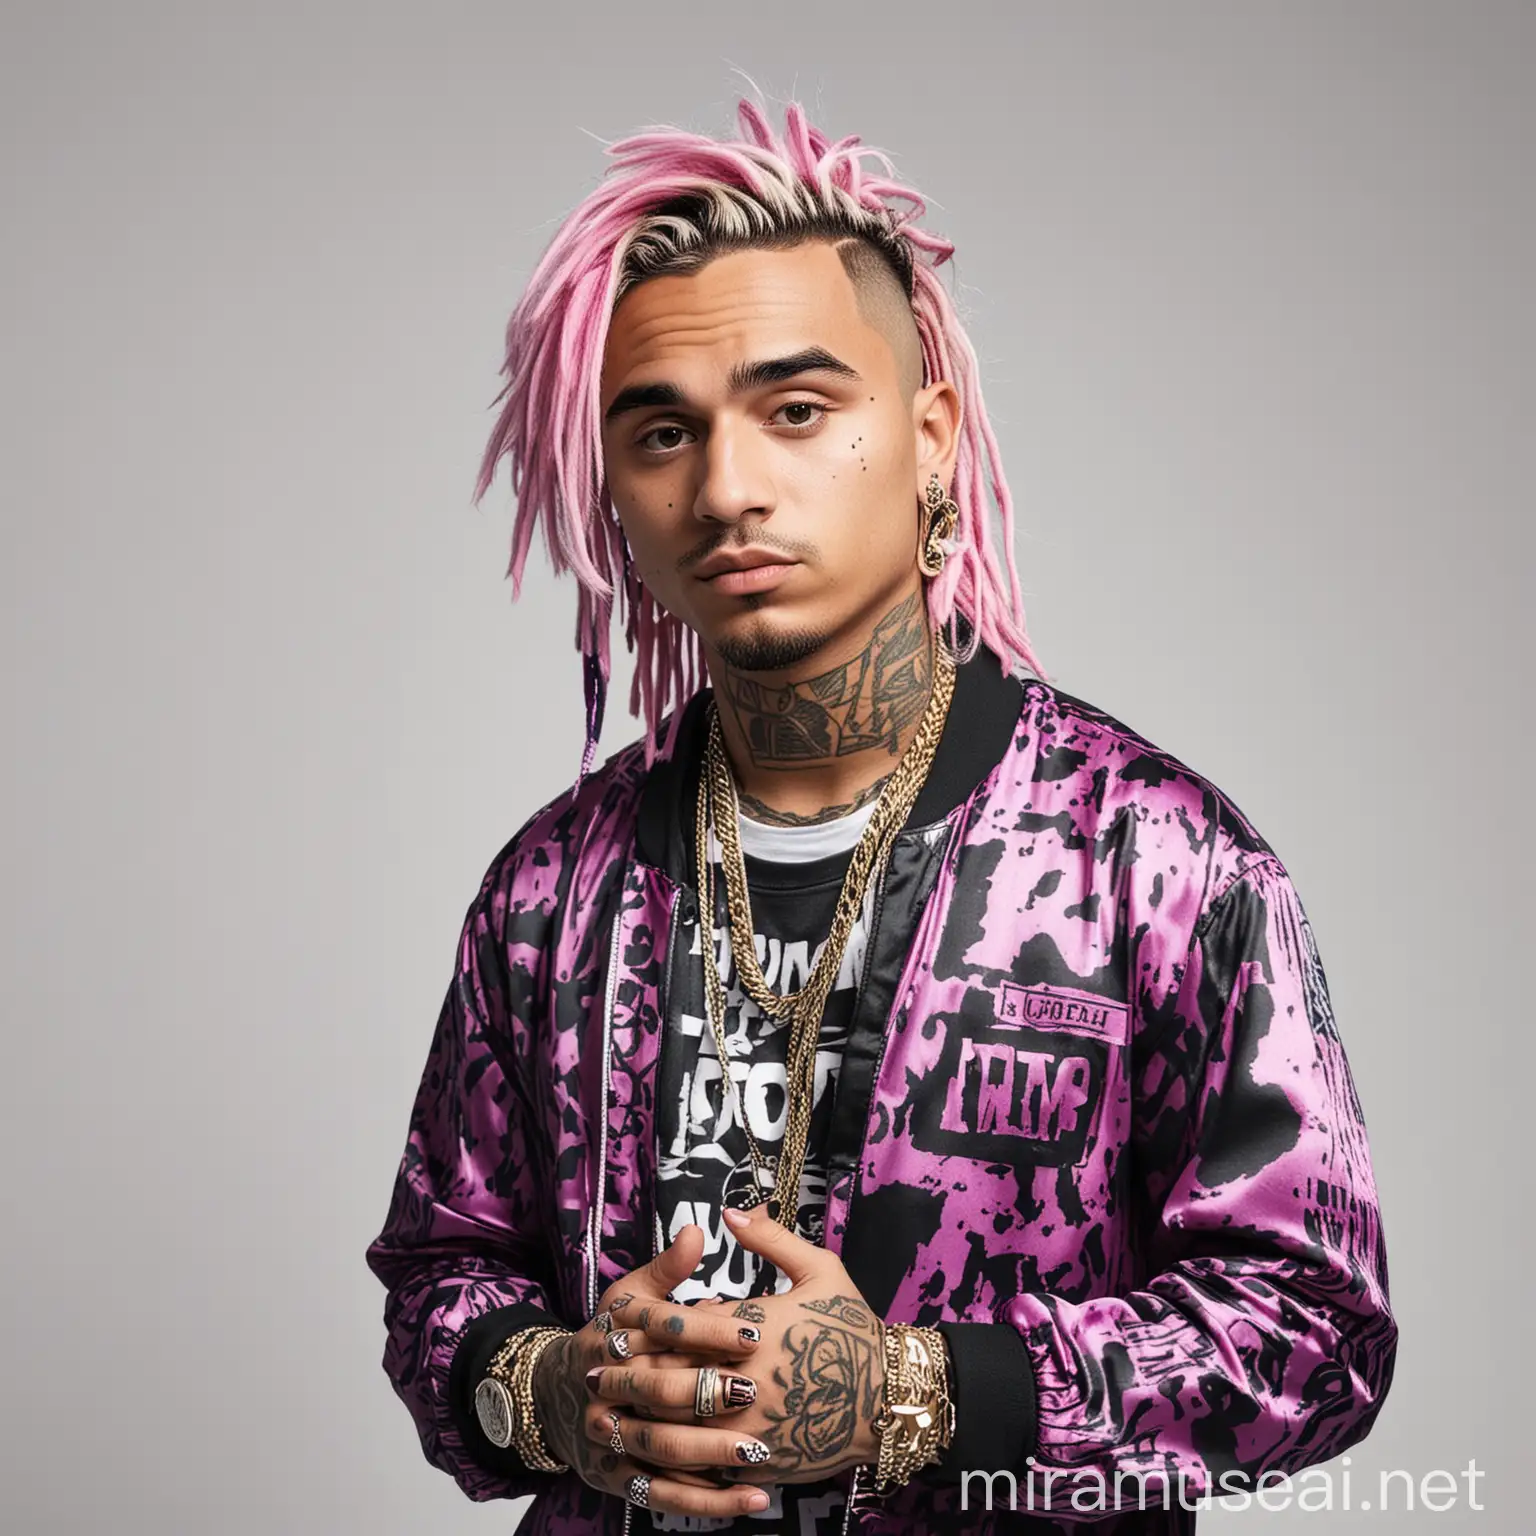 Lil Pump Poses on Clean White Background for Vibrant Portrait